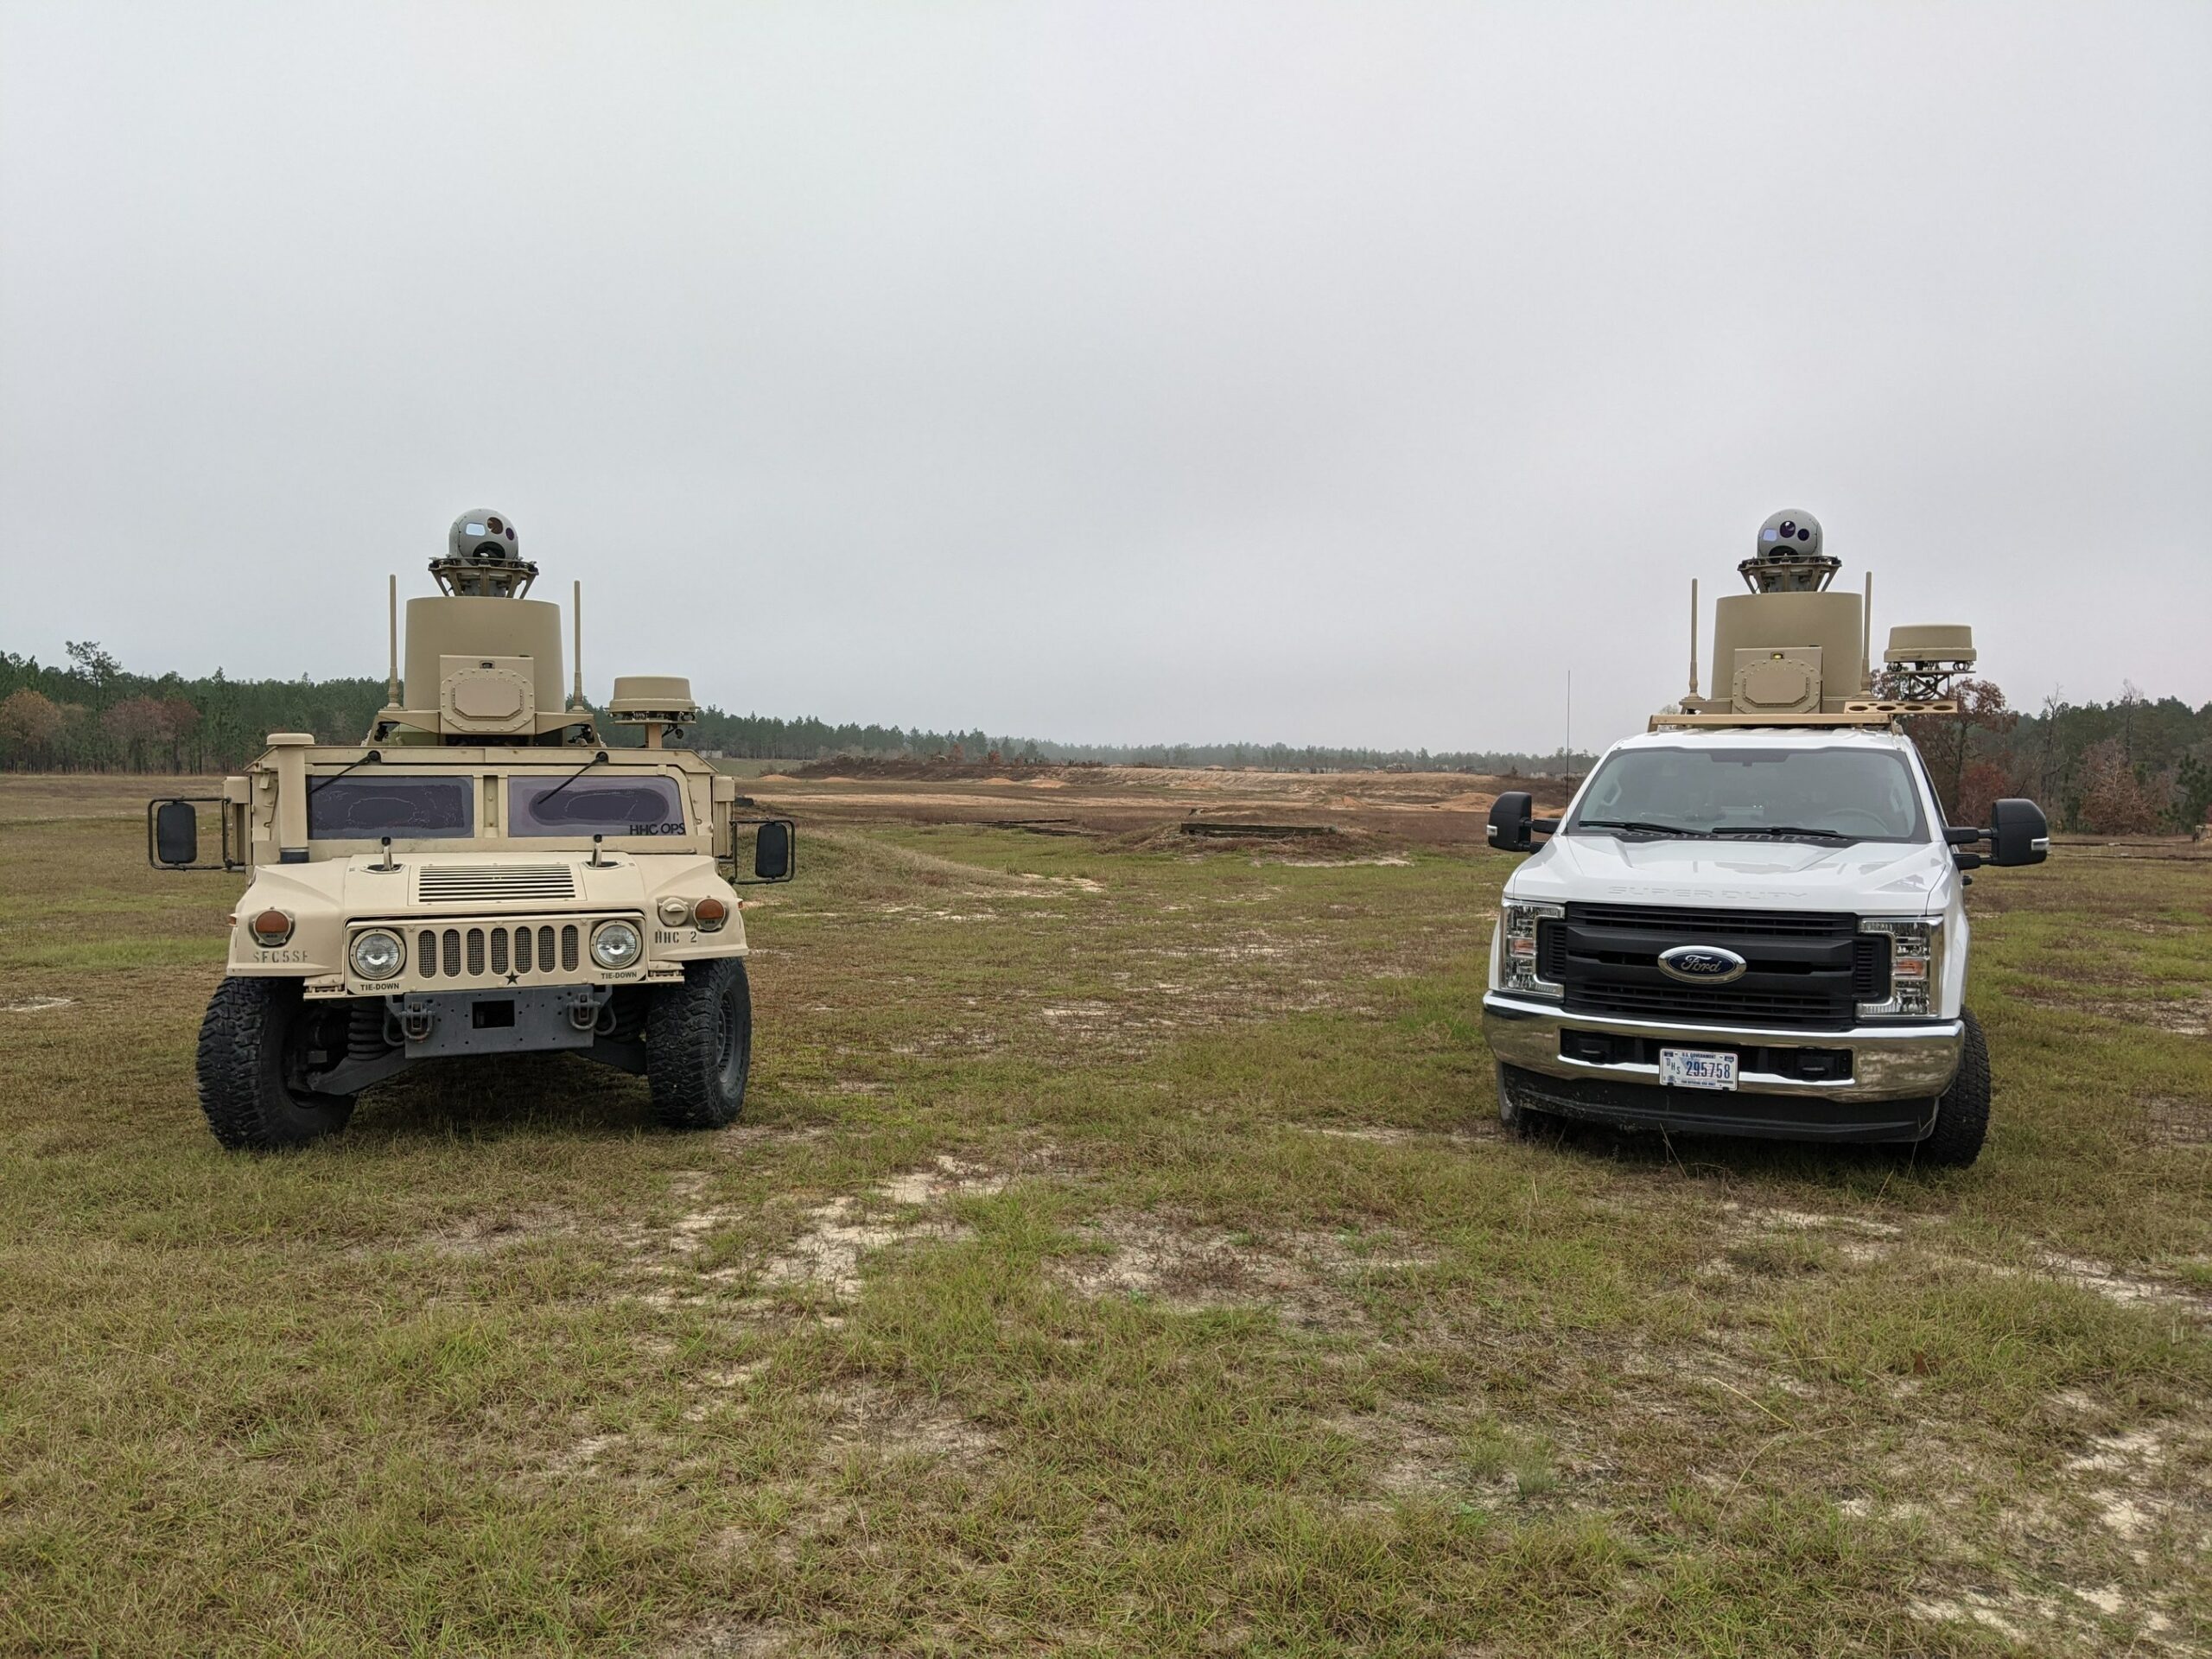 MADS-K OTM V4 counter-drone systems installed on an Up-Armored HMMWV & Ford F350 Platforms